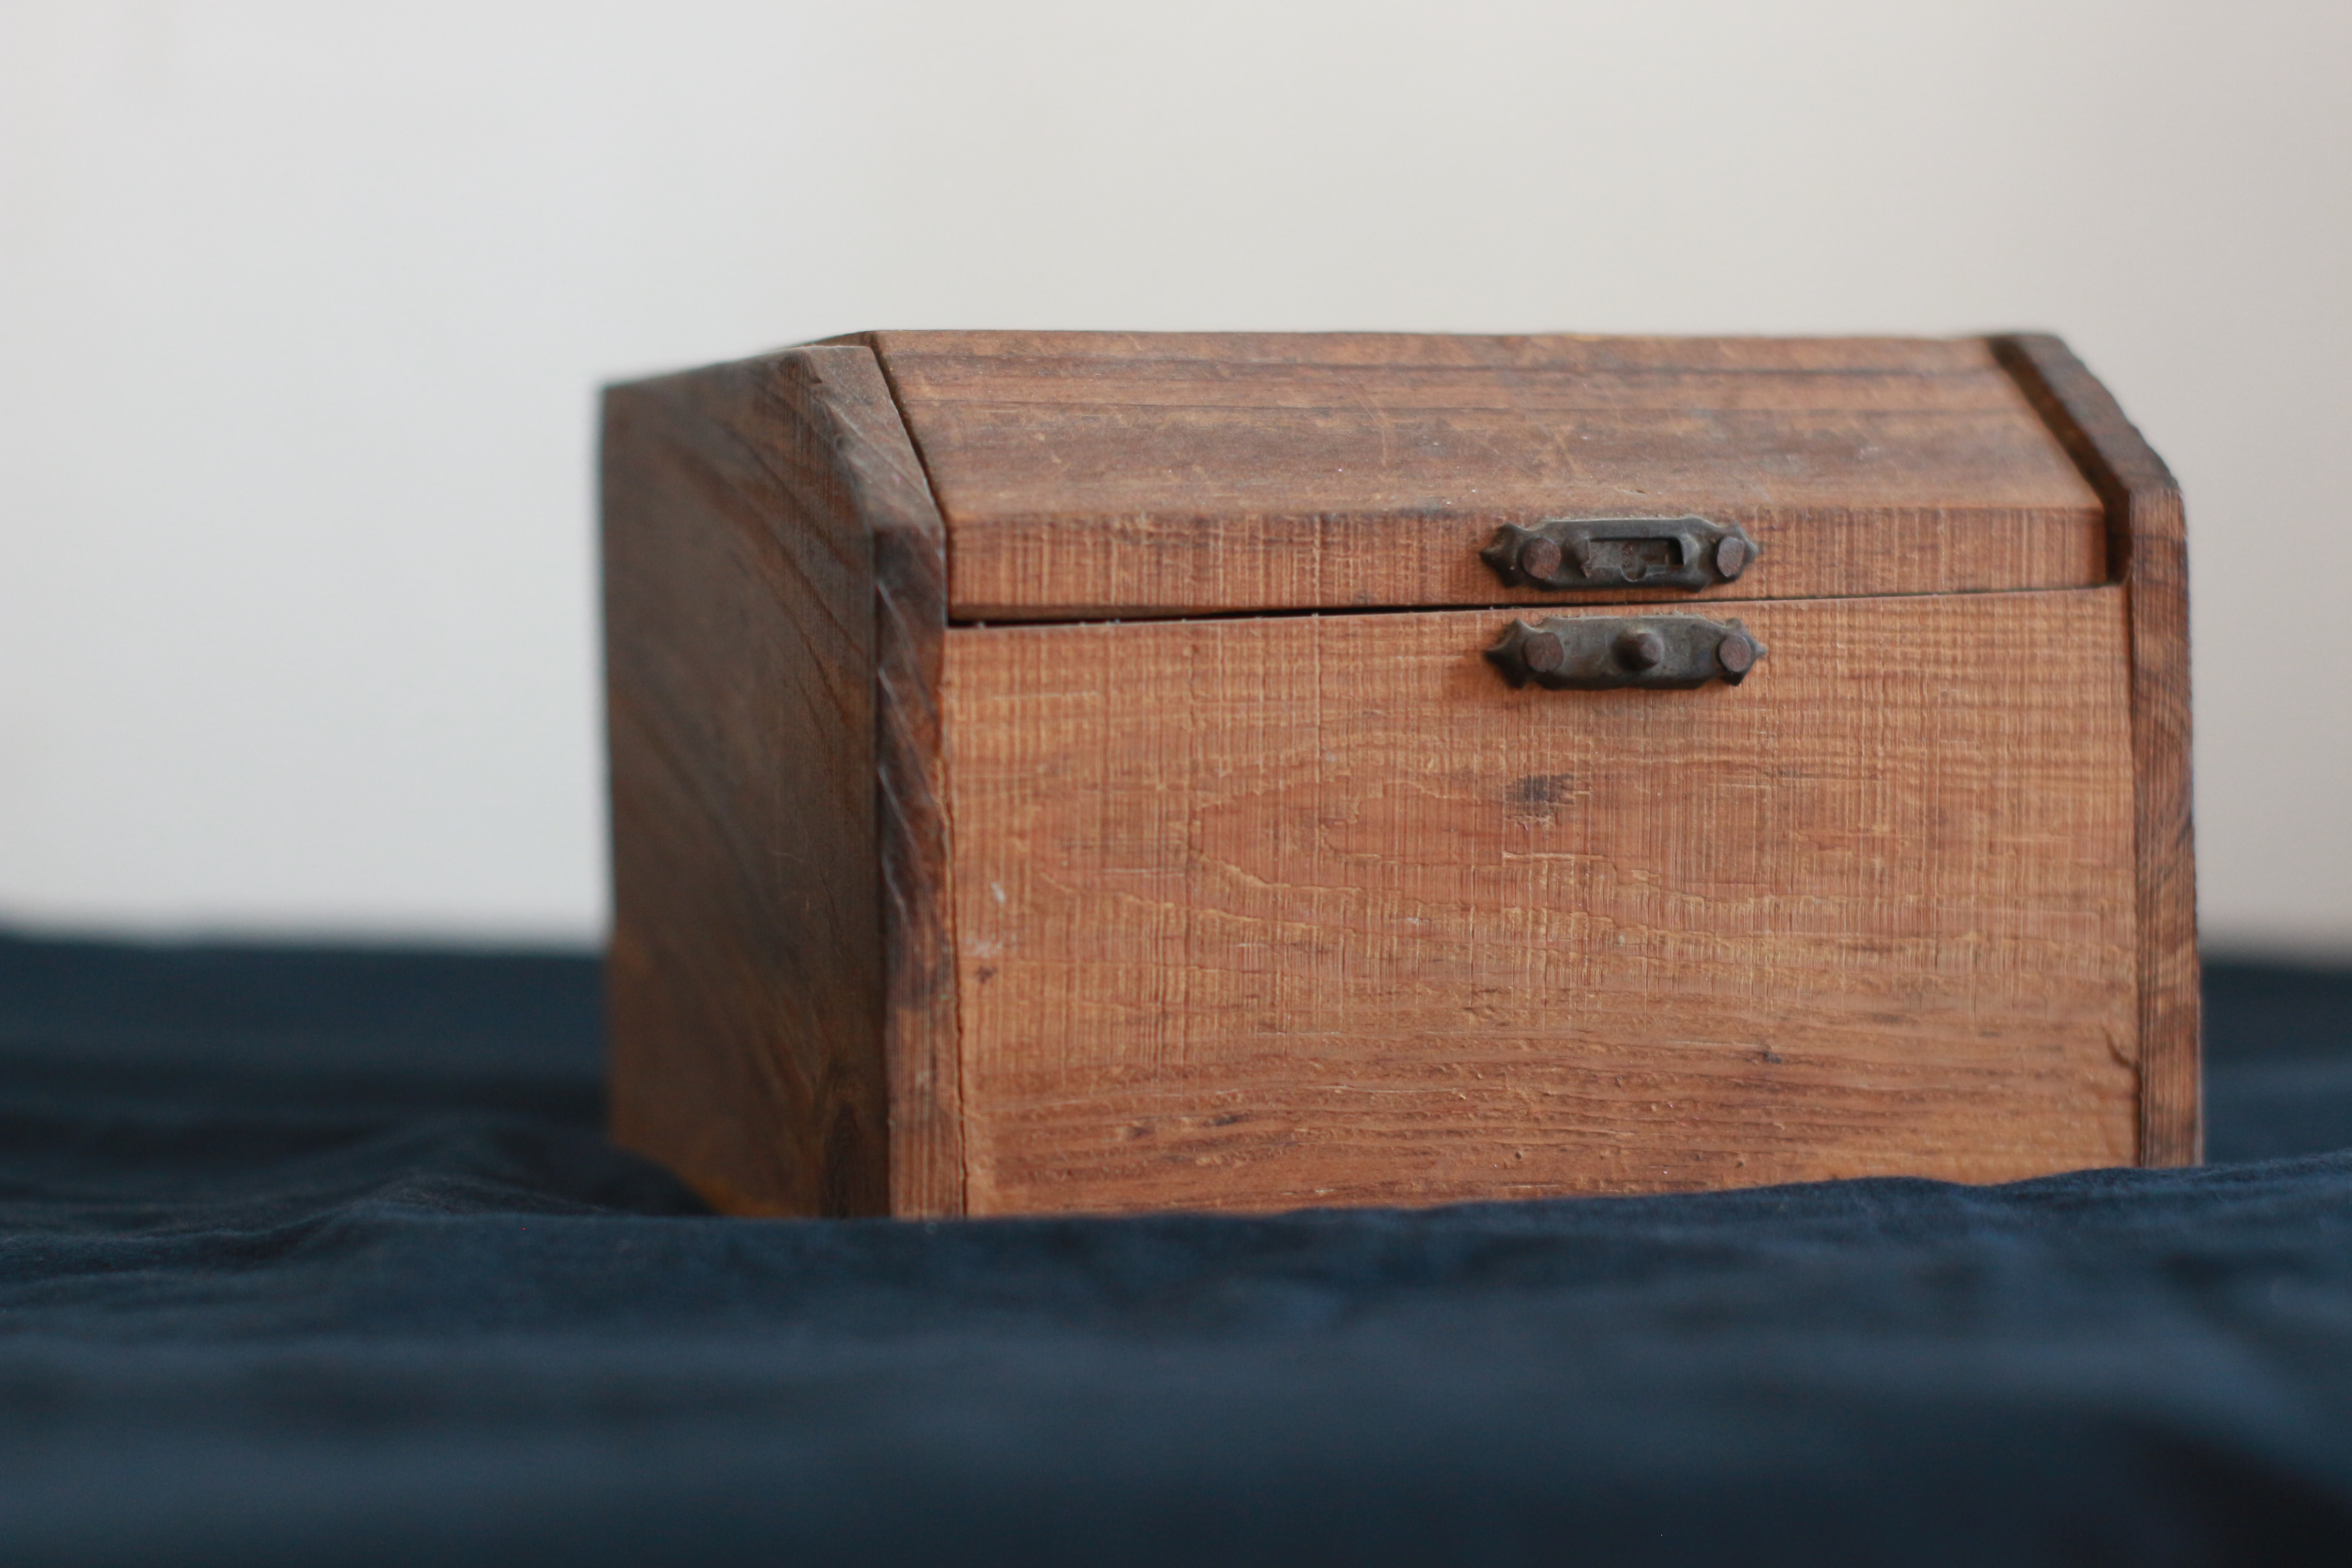 A handmade wooden box with a missing latch
